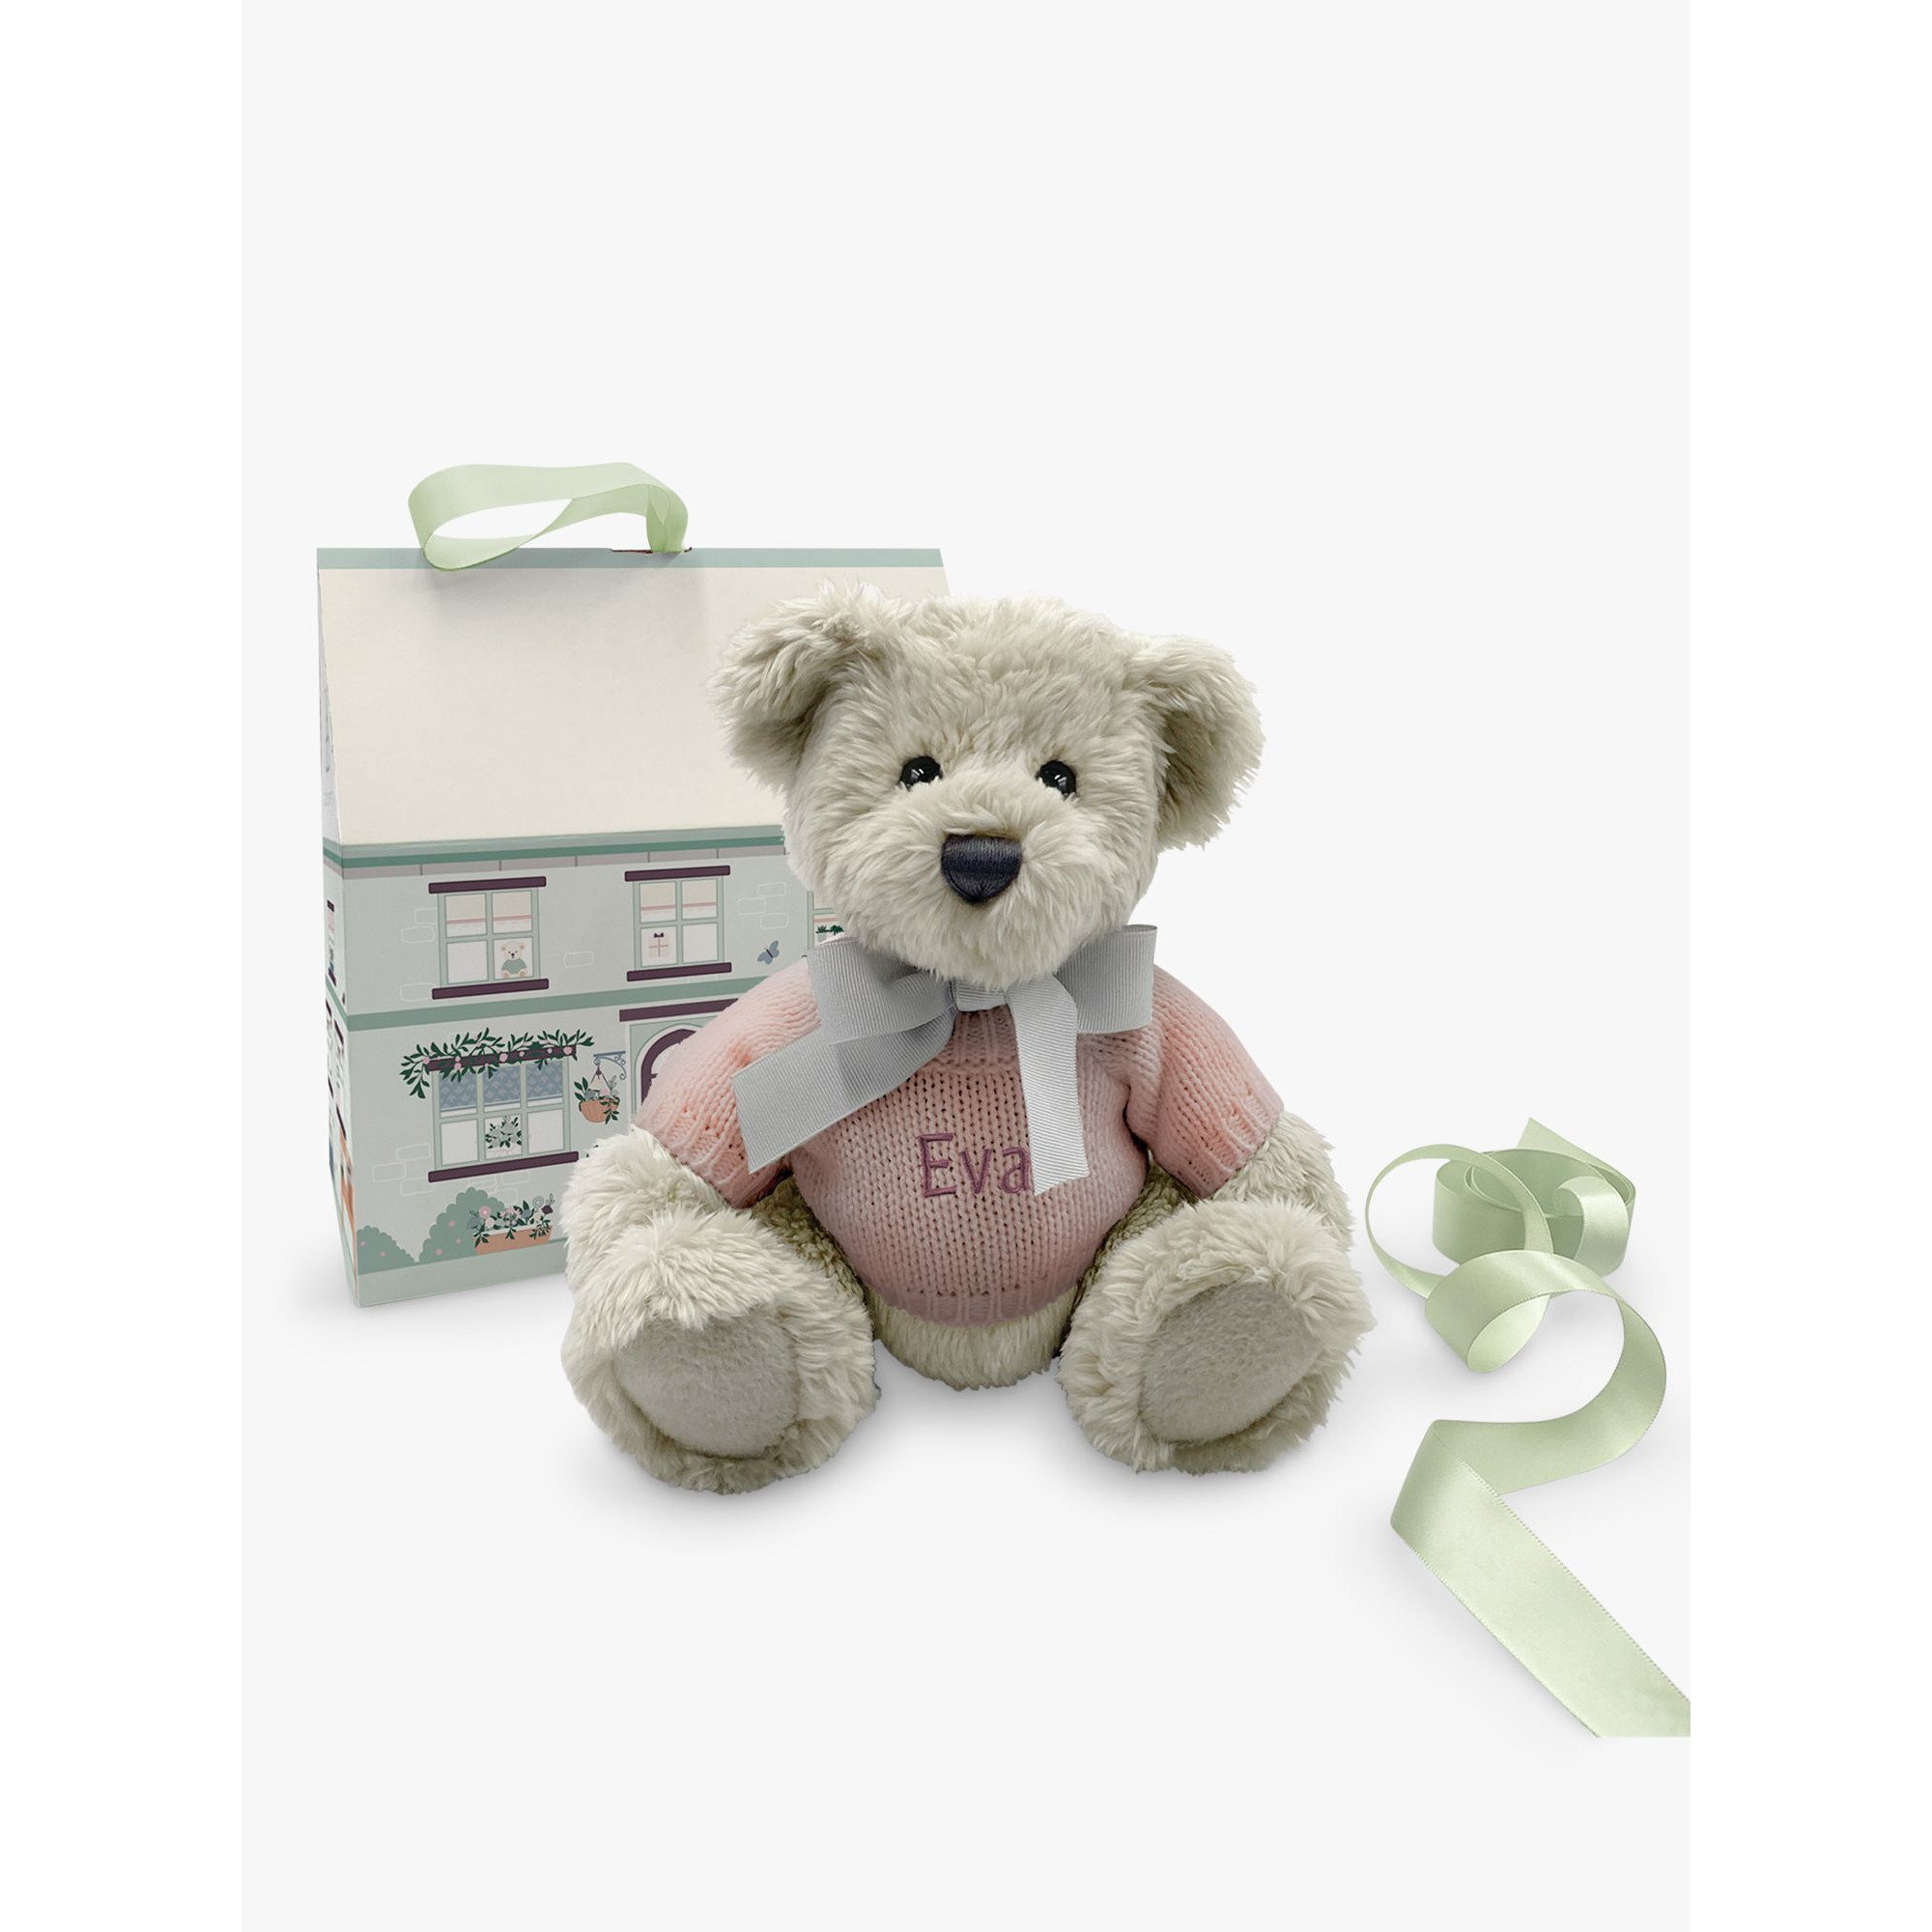 Babyblooms Personalised Berkeley Bear Soft Toy with Bear House Box, Light Pink - image 1